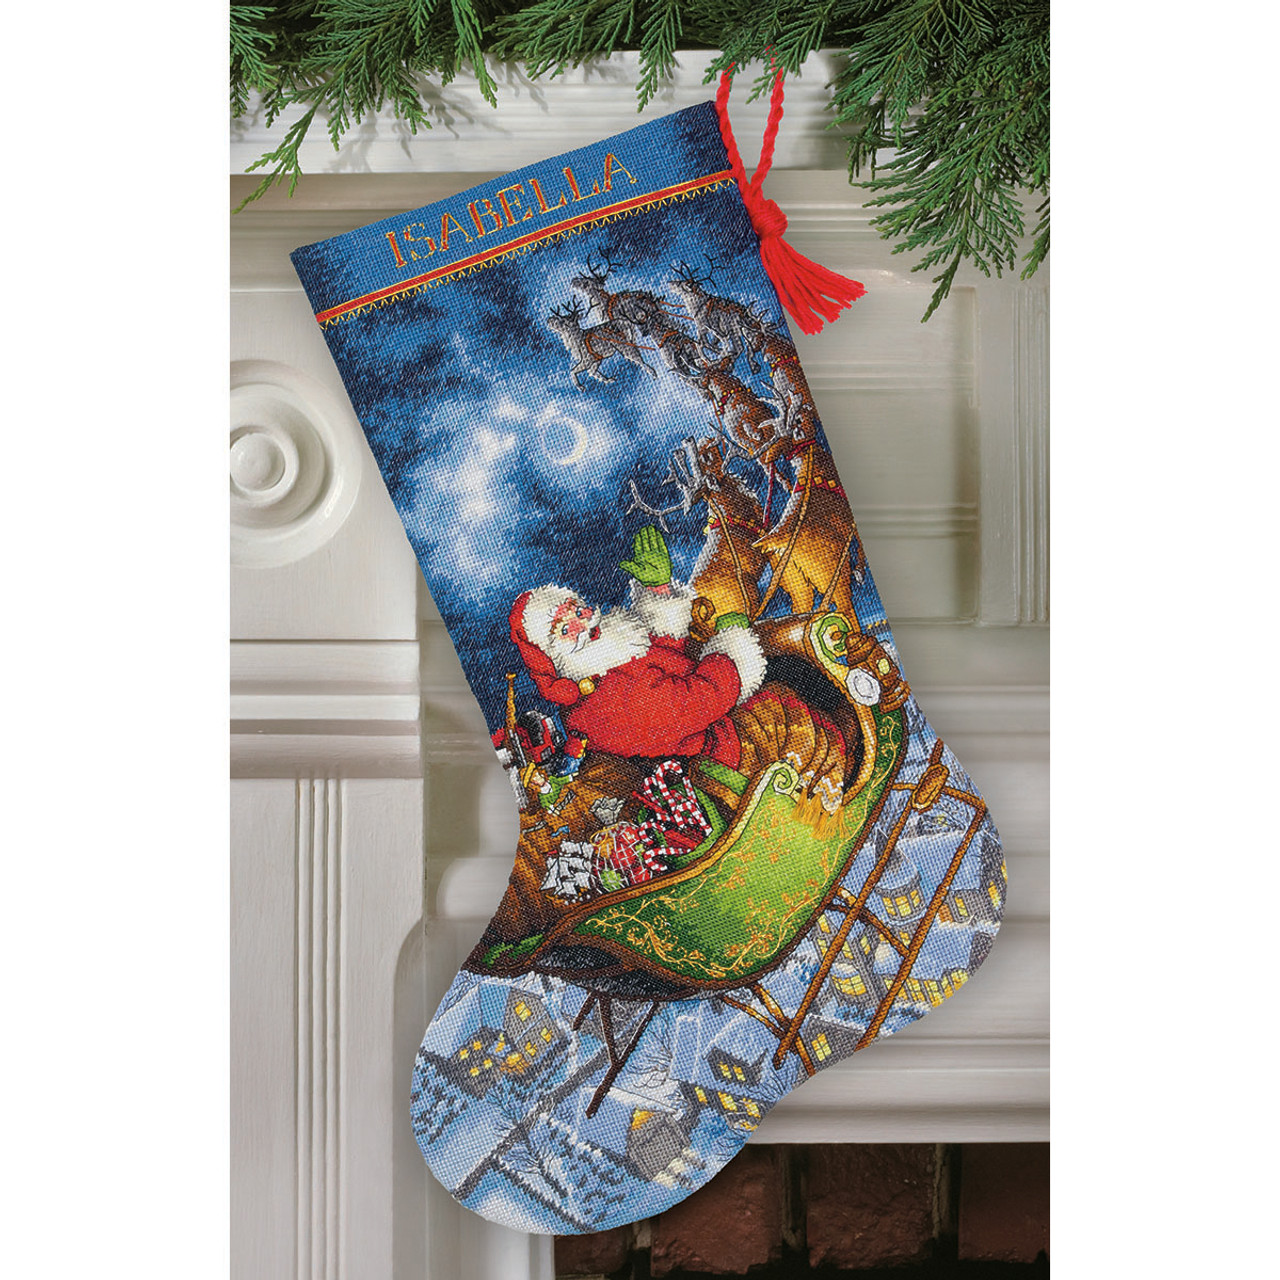 Dimensions Gold Collection Counted Cross Stitch Kit 16 Long-Holiday Glow Stocking (18 Count)